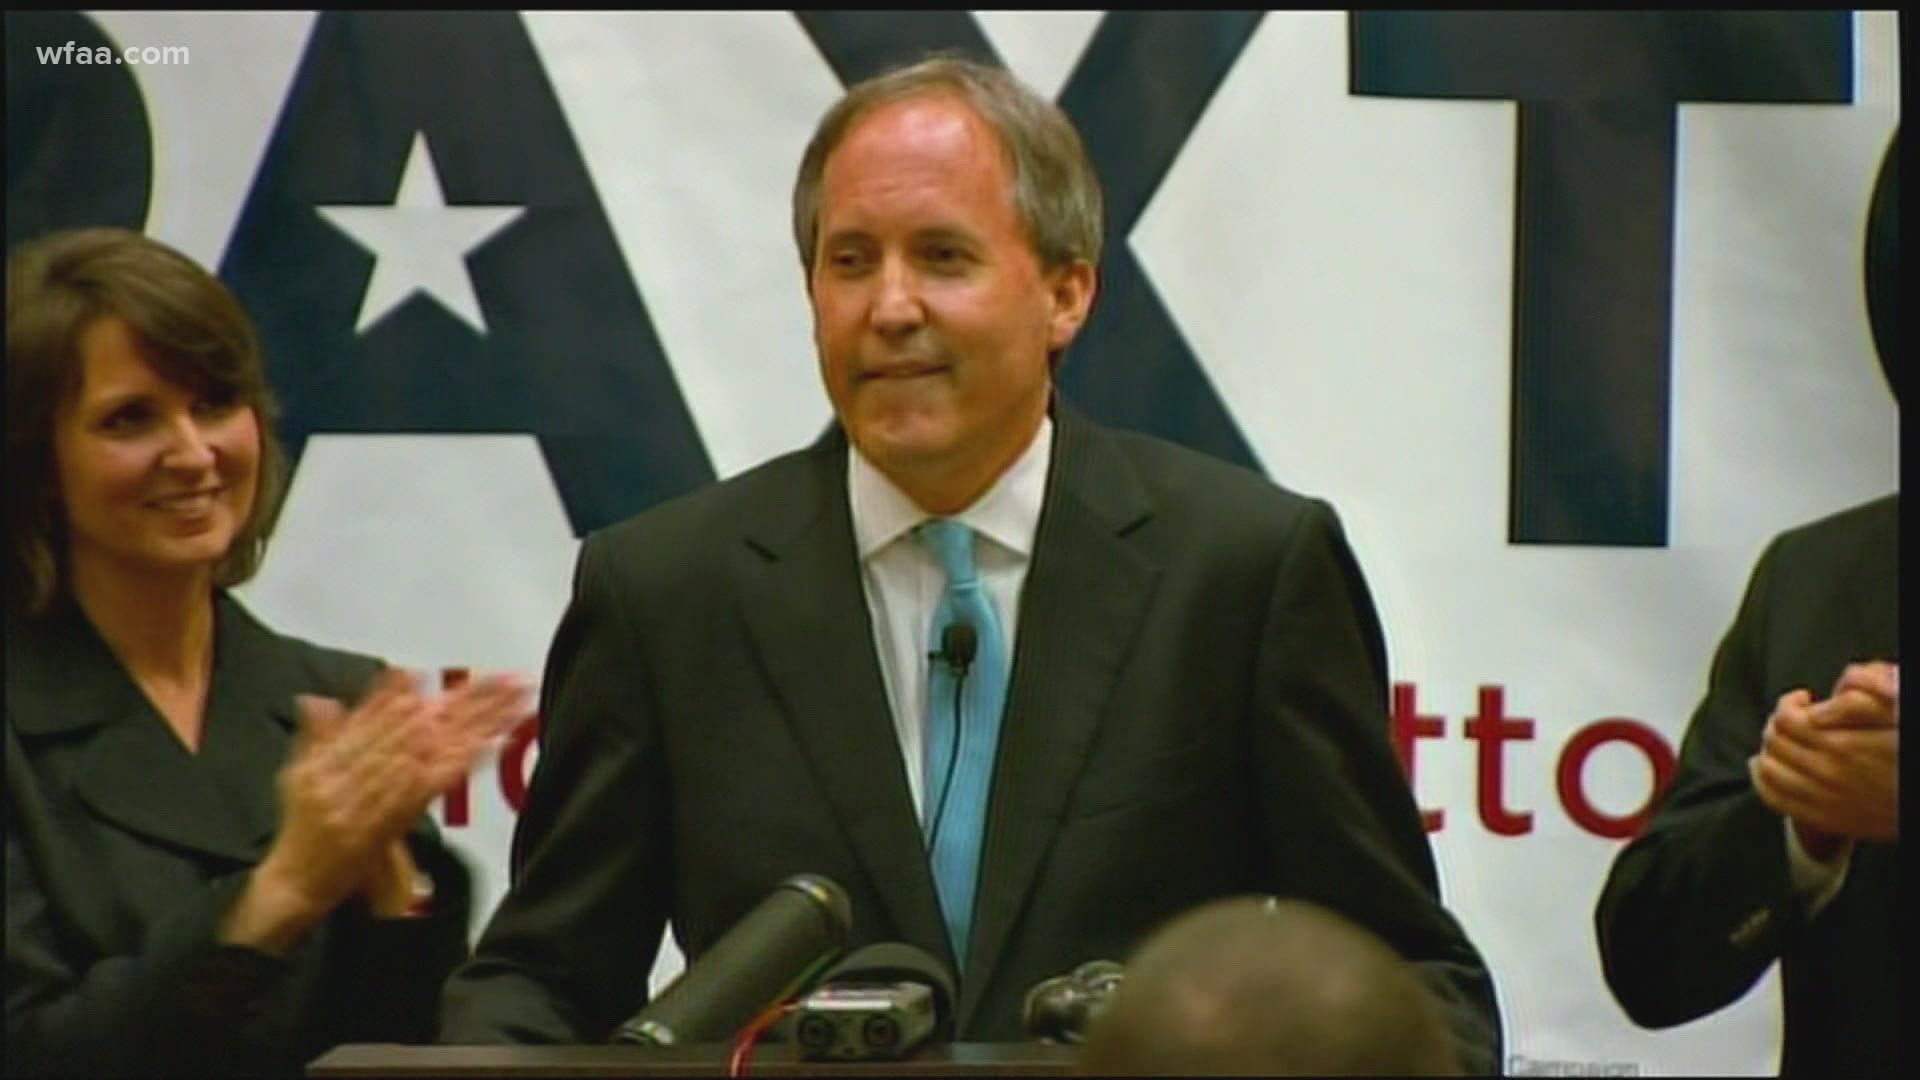 Four high-ranking members of Texas Attorney General Ken Paxton's office filed a whistleblower lawsuit against him.